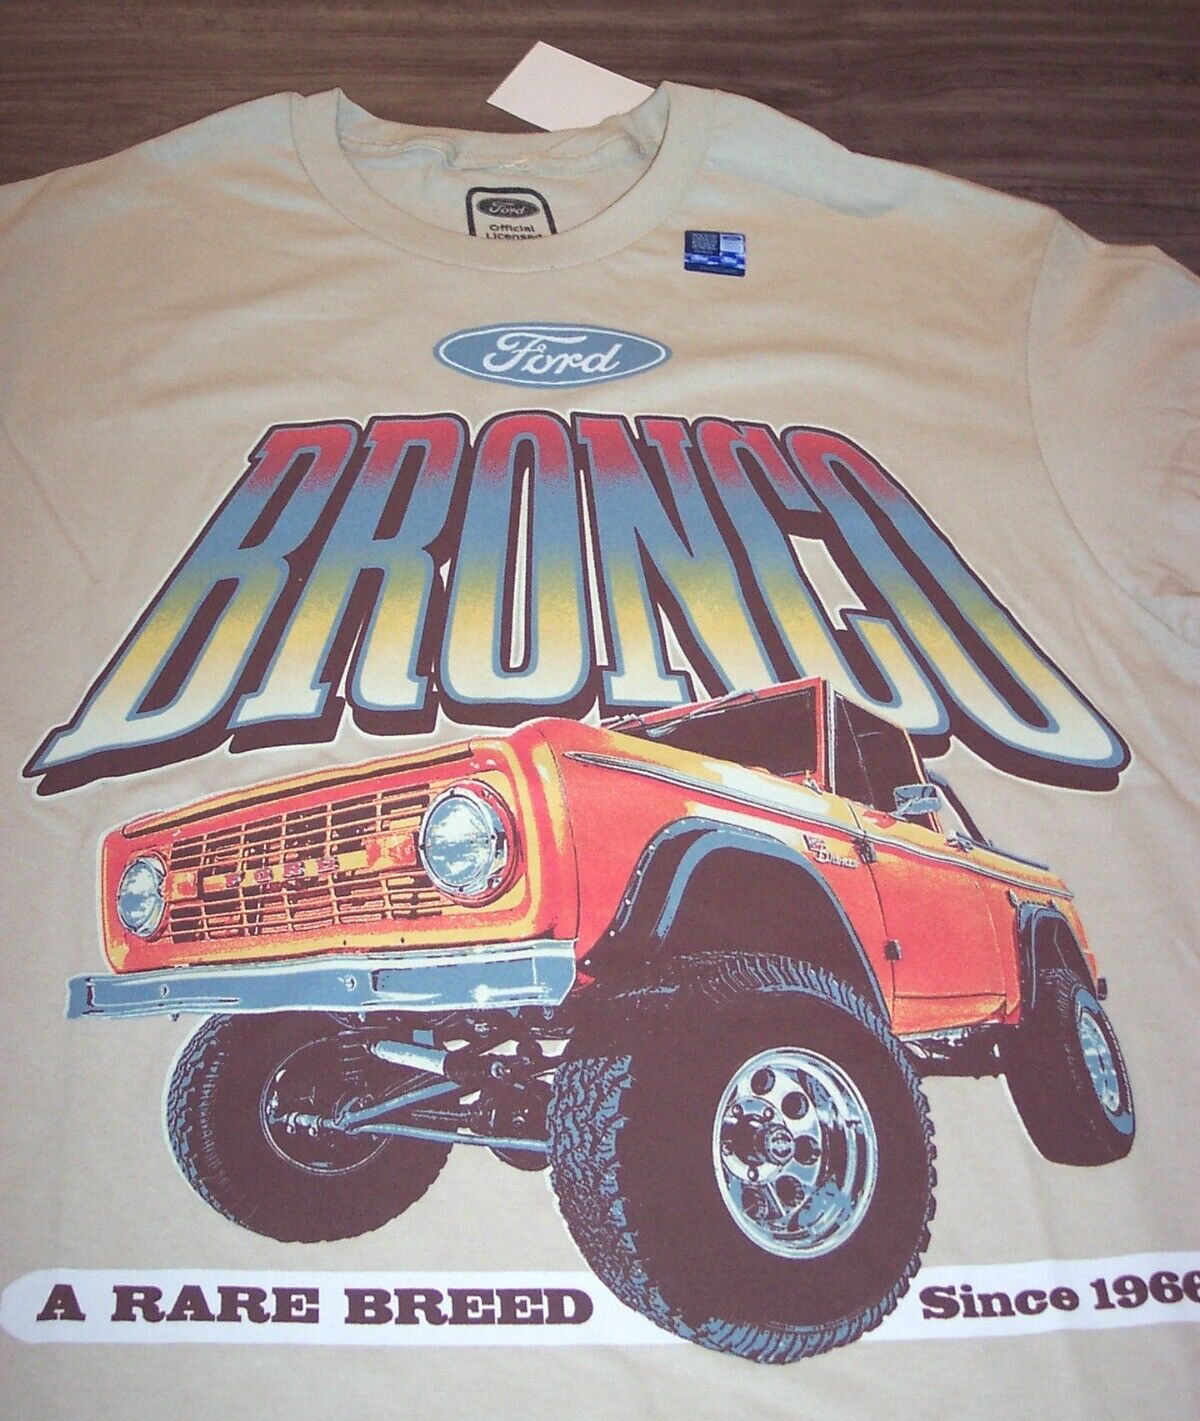 VINTAGE STYLE FORD BRONCO 4X4 Truck T-Shirt MENS LARGE NEW w/ TAG